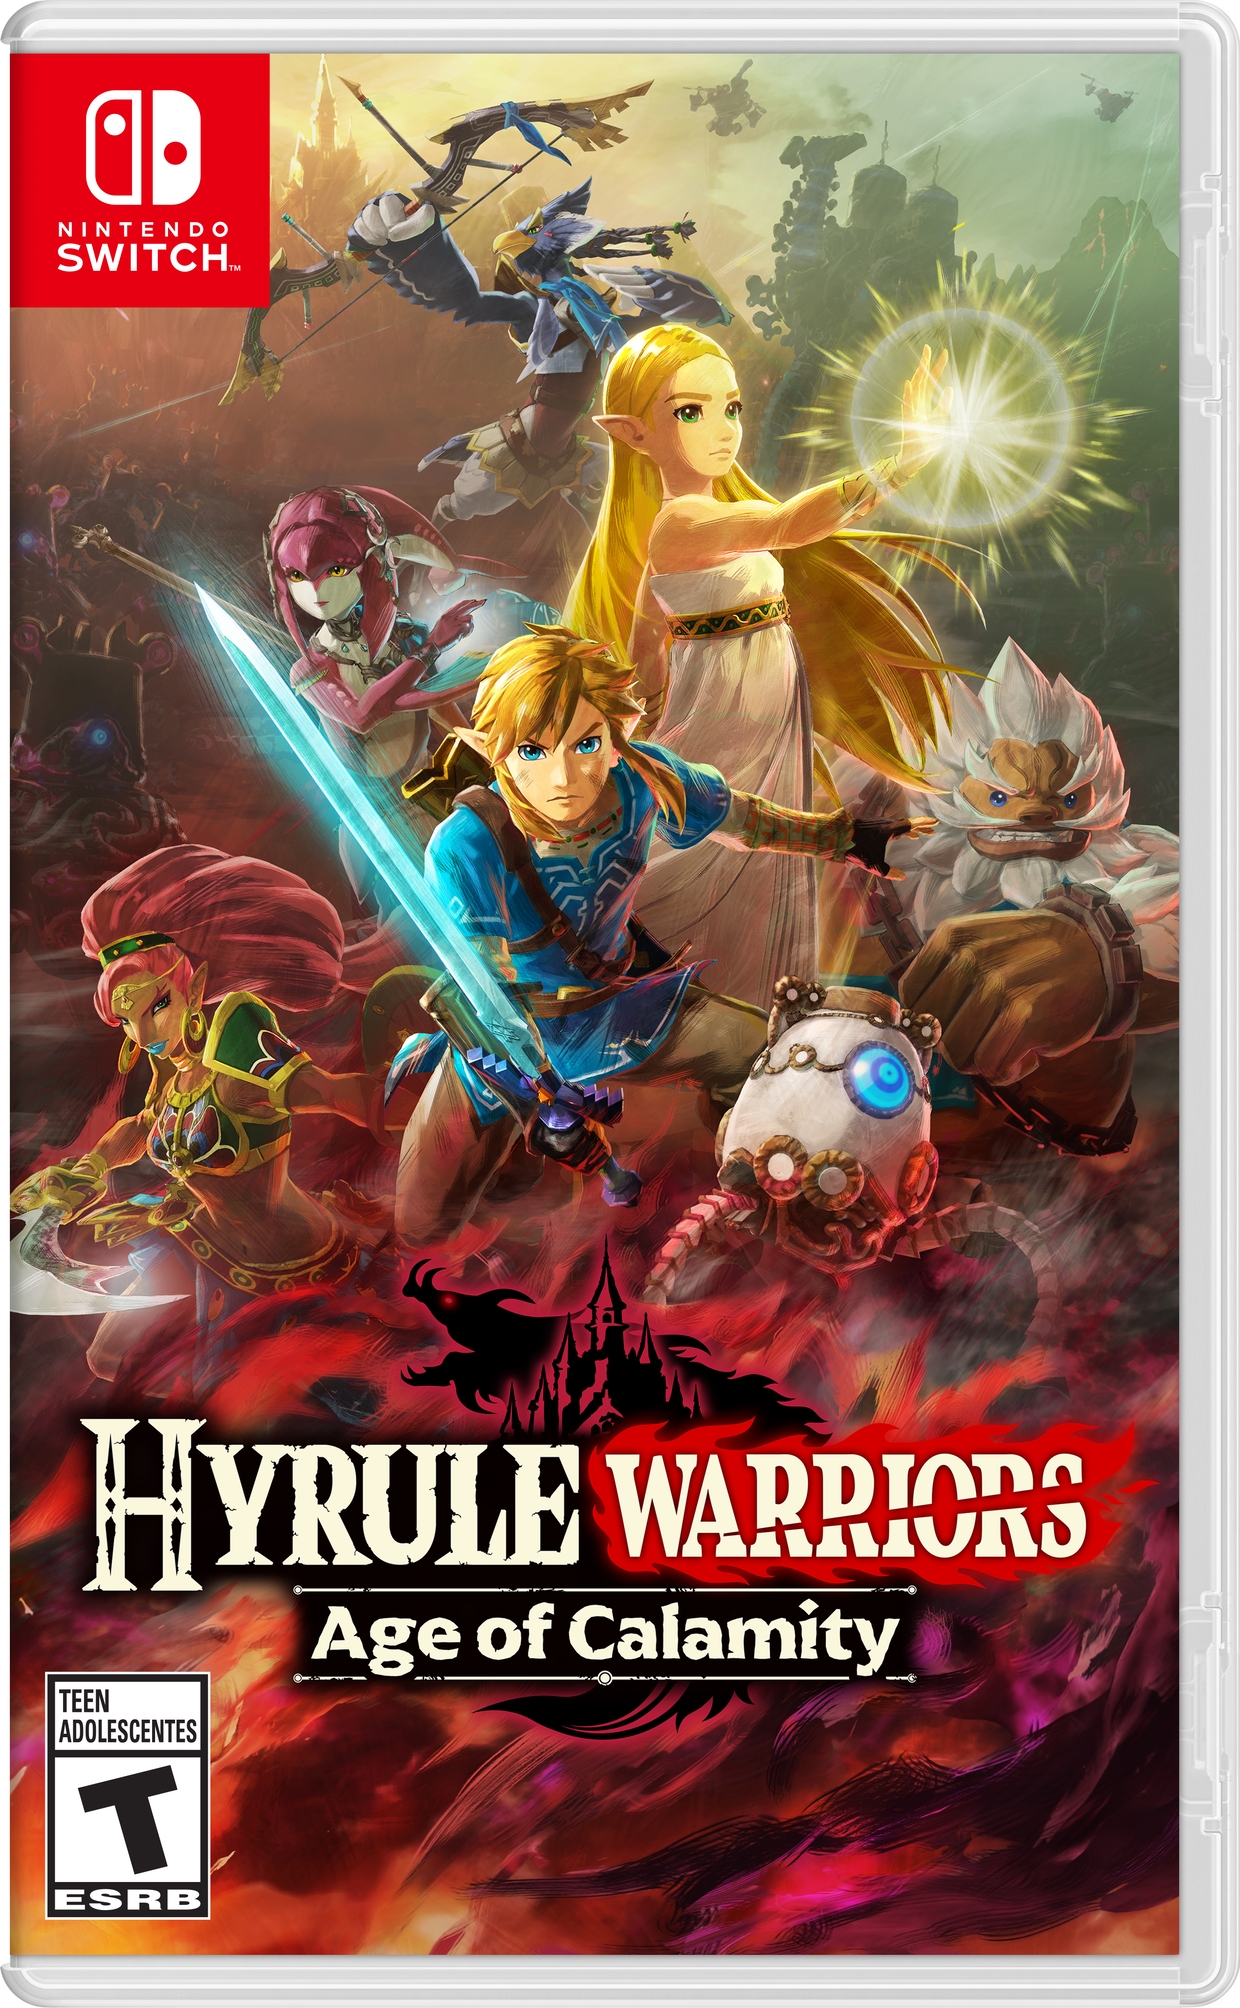 Hyrule Warriors: Age of Calamity Launches Exclusively for Nintendo Switch  on Nov. 20 | Business Wire